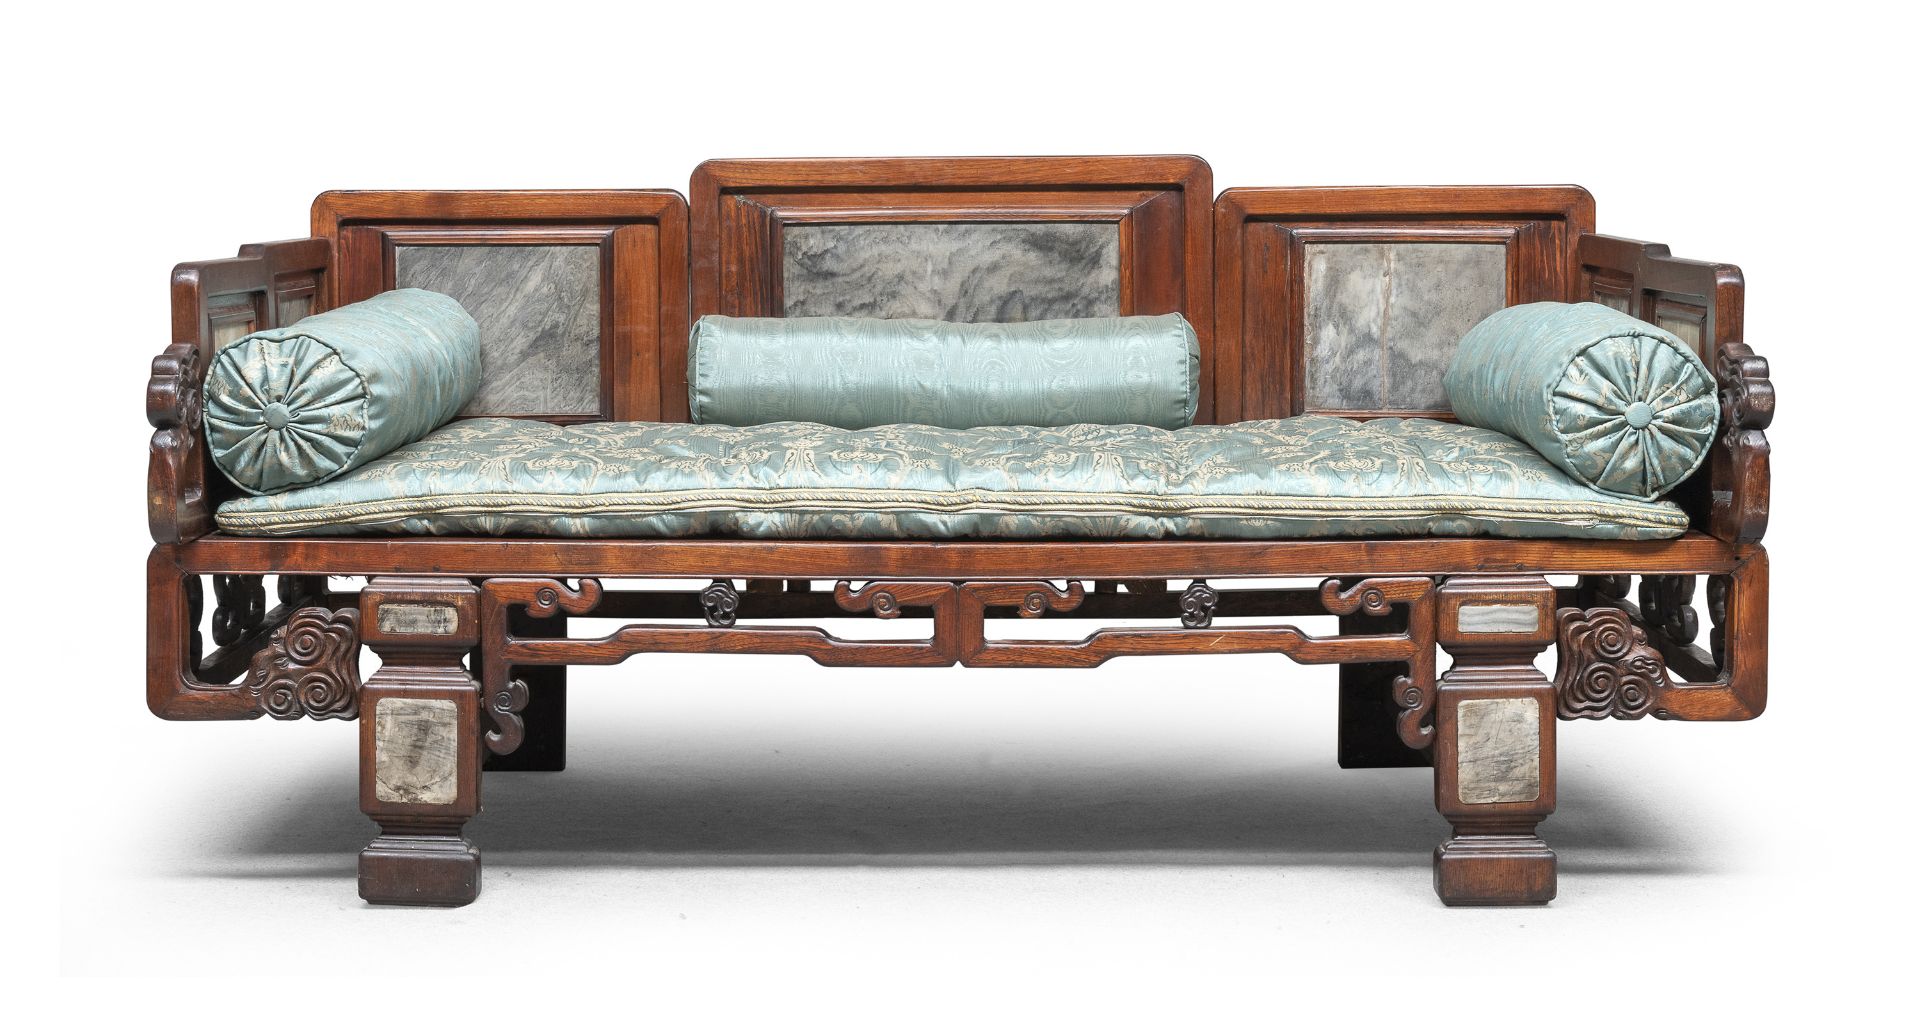 A CHINESE TEAK WOOD BED LATE 19TH CENTURY. - Image 2 of 2